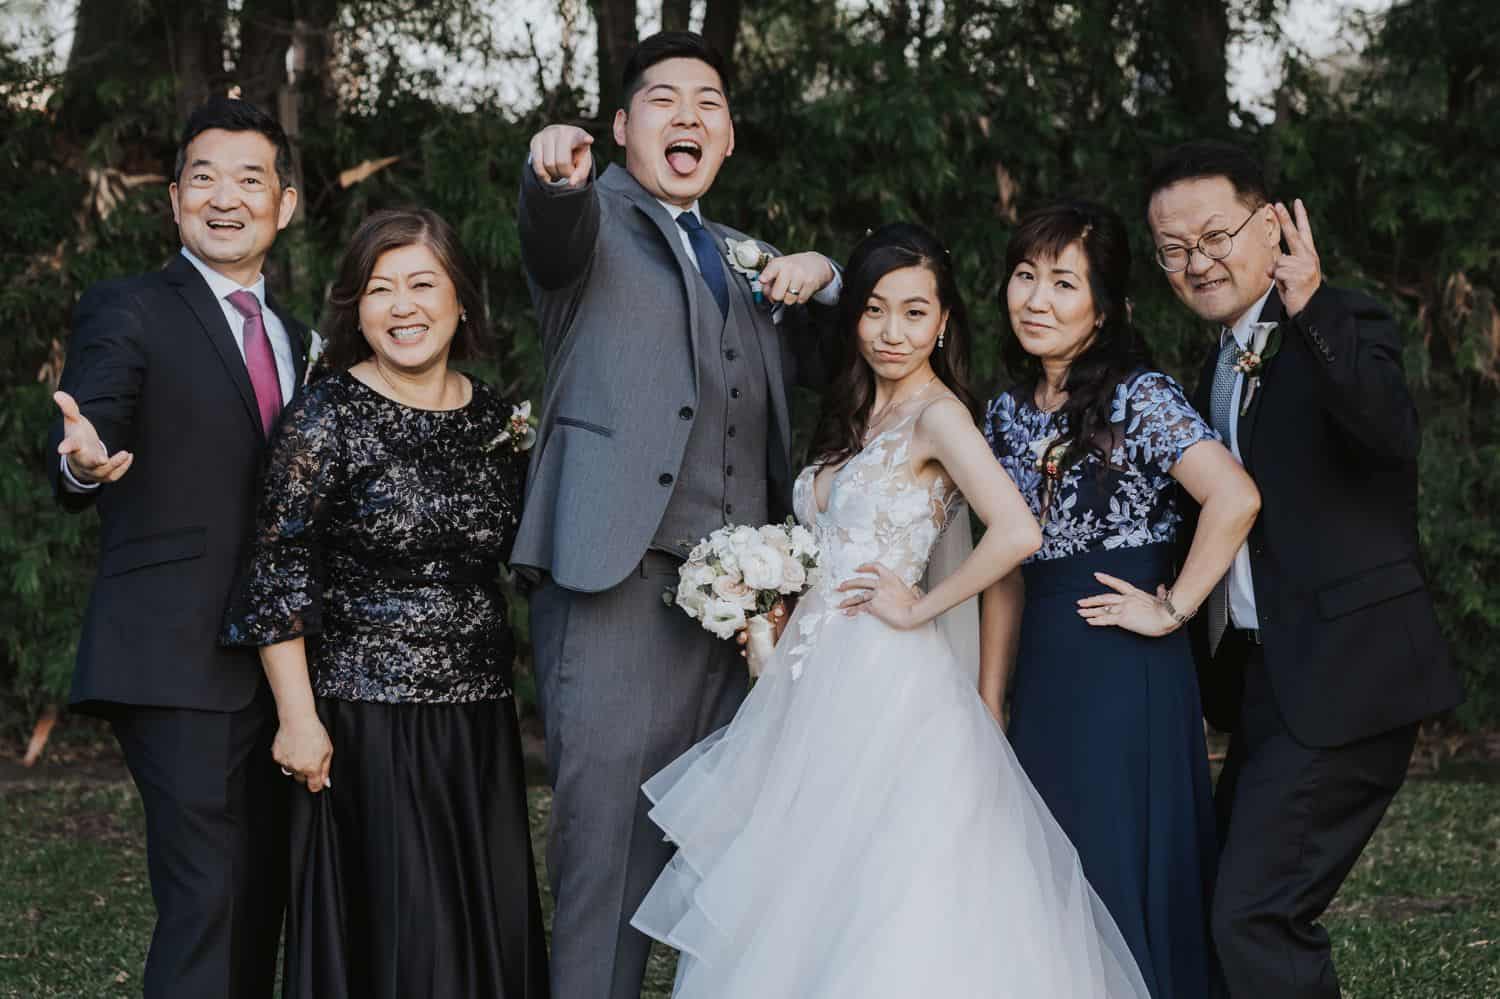 Family members act silly for their wedding day portrait